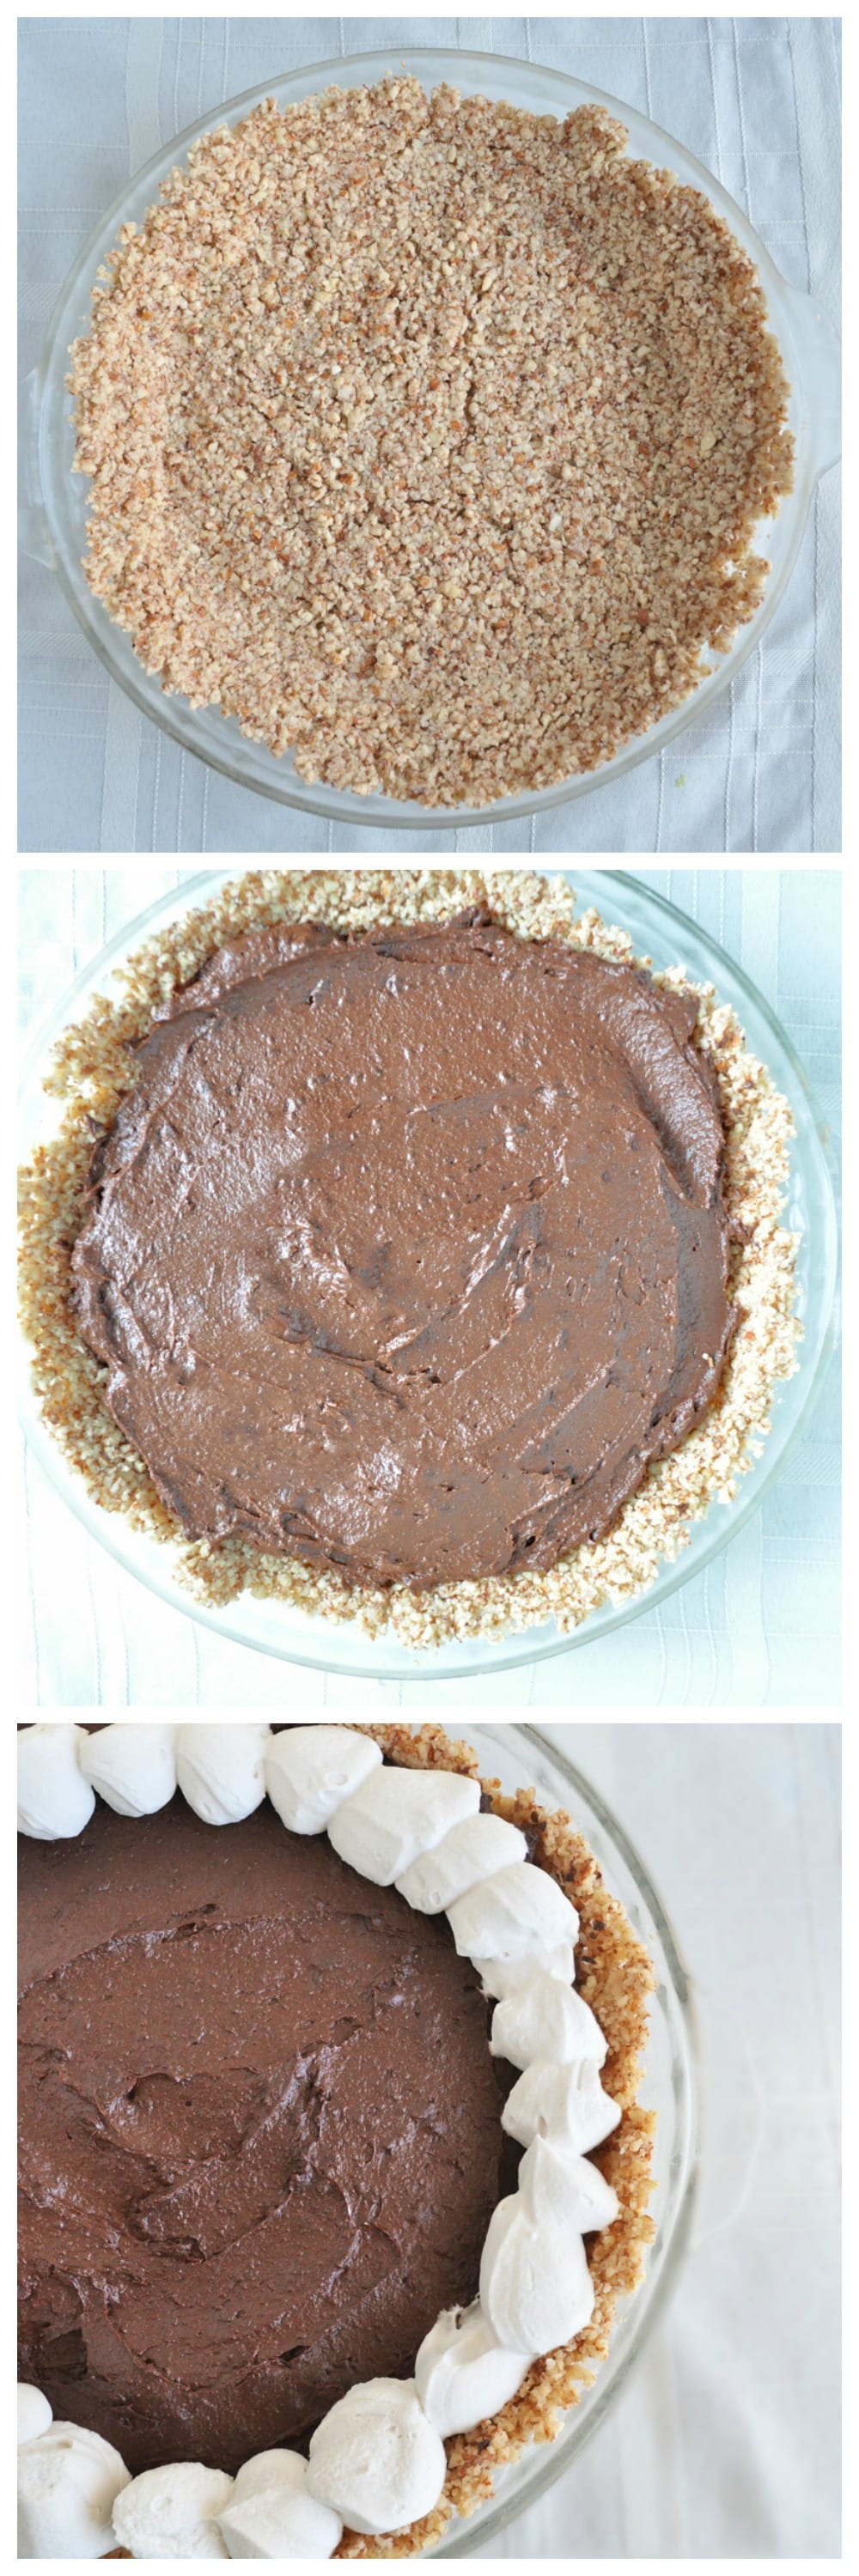 Chocolate Mousse Pie Steps